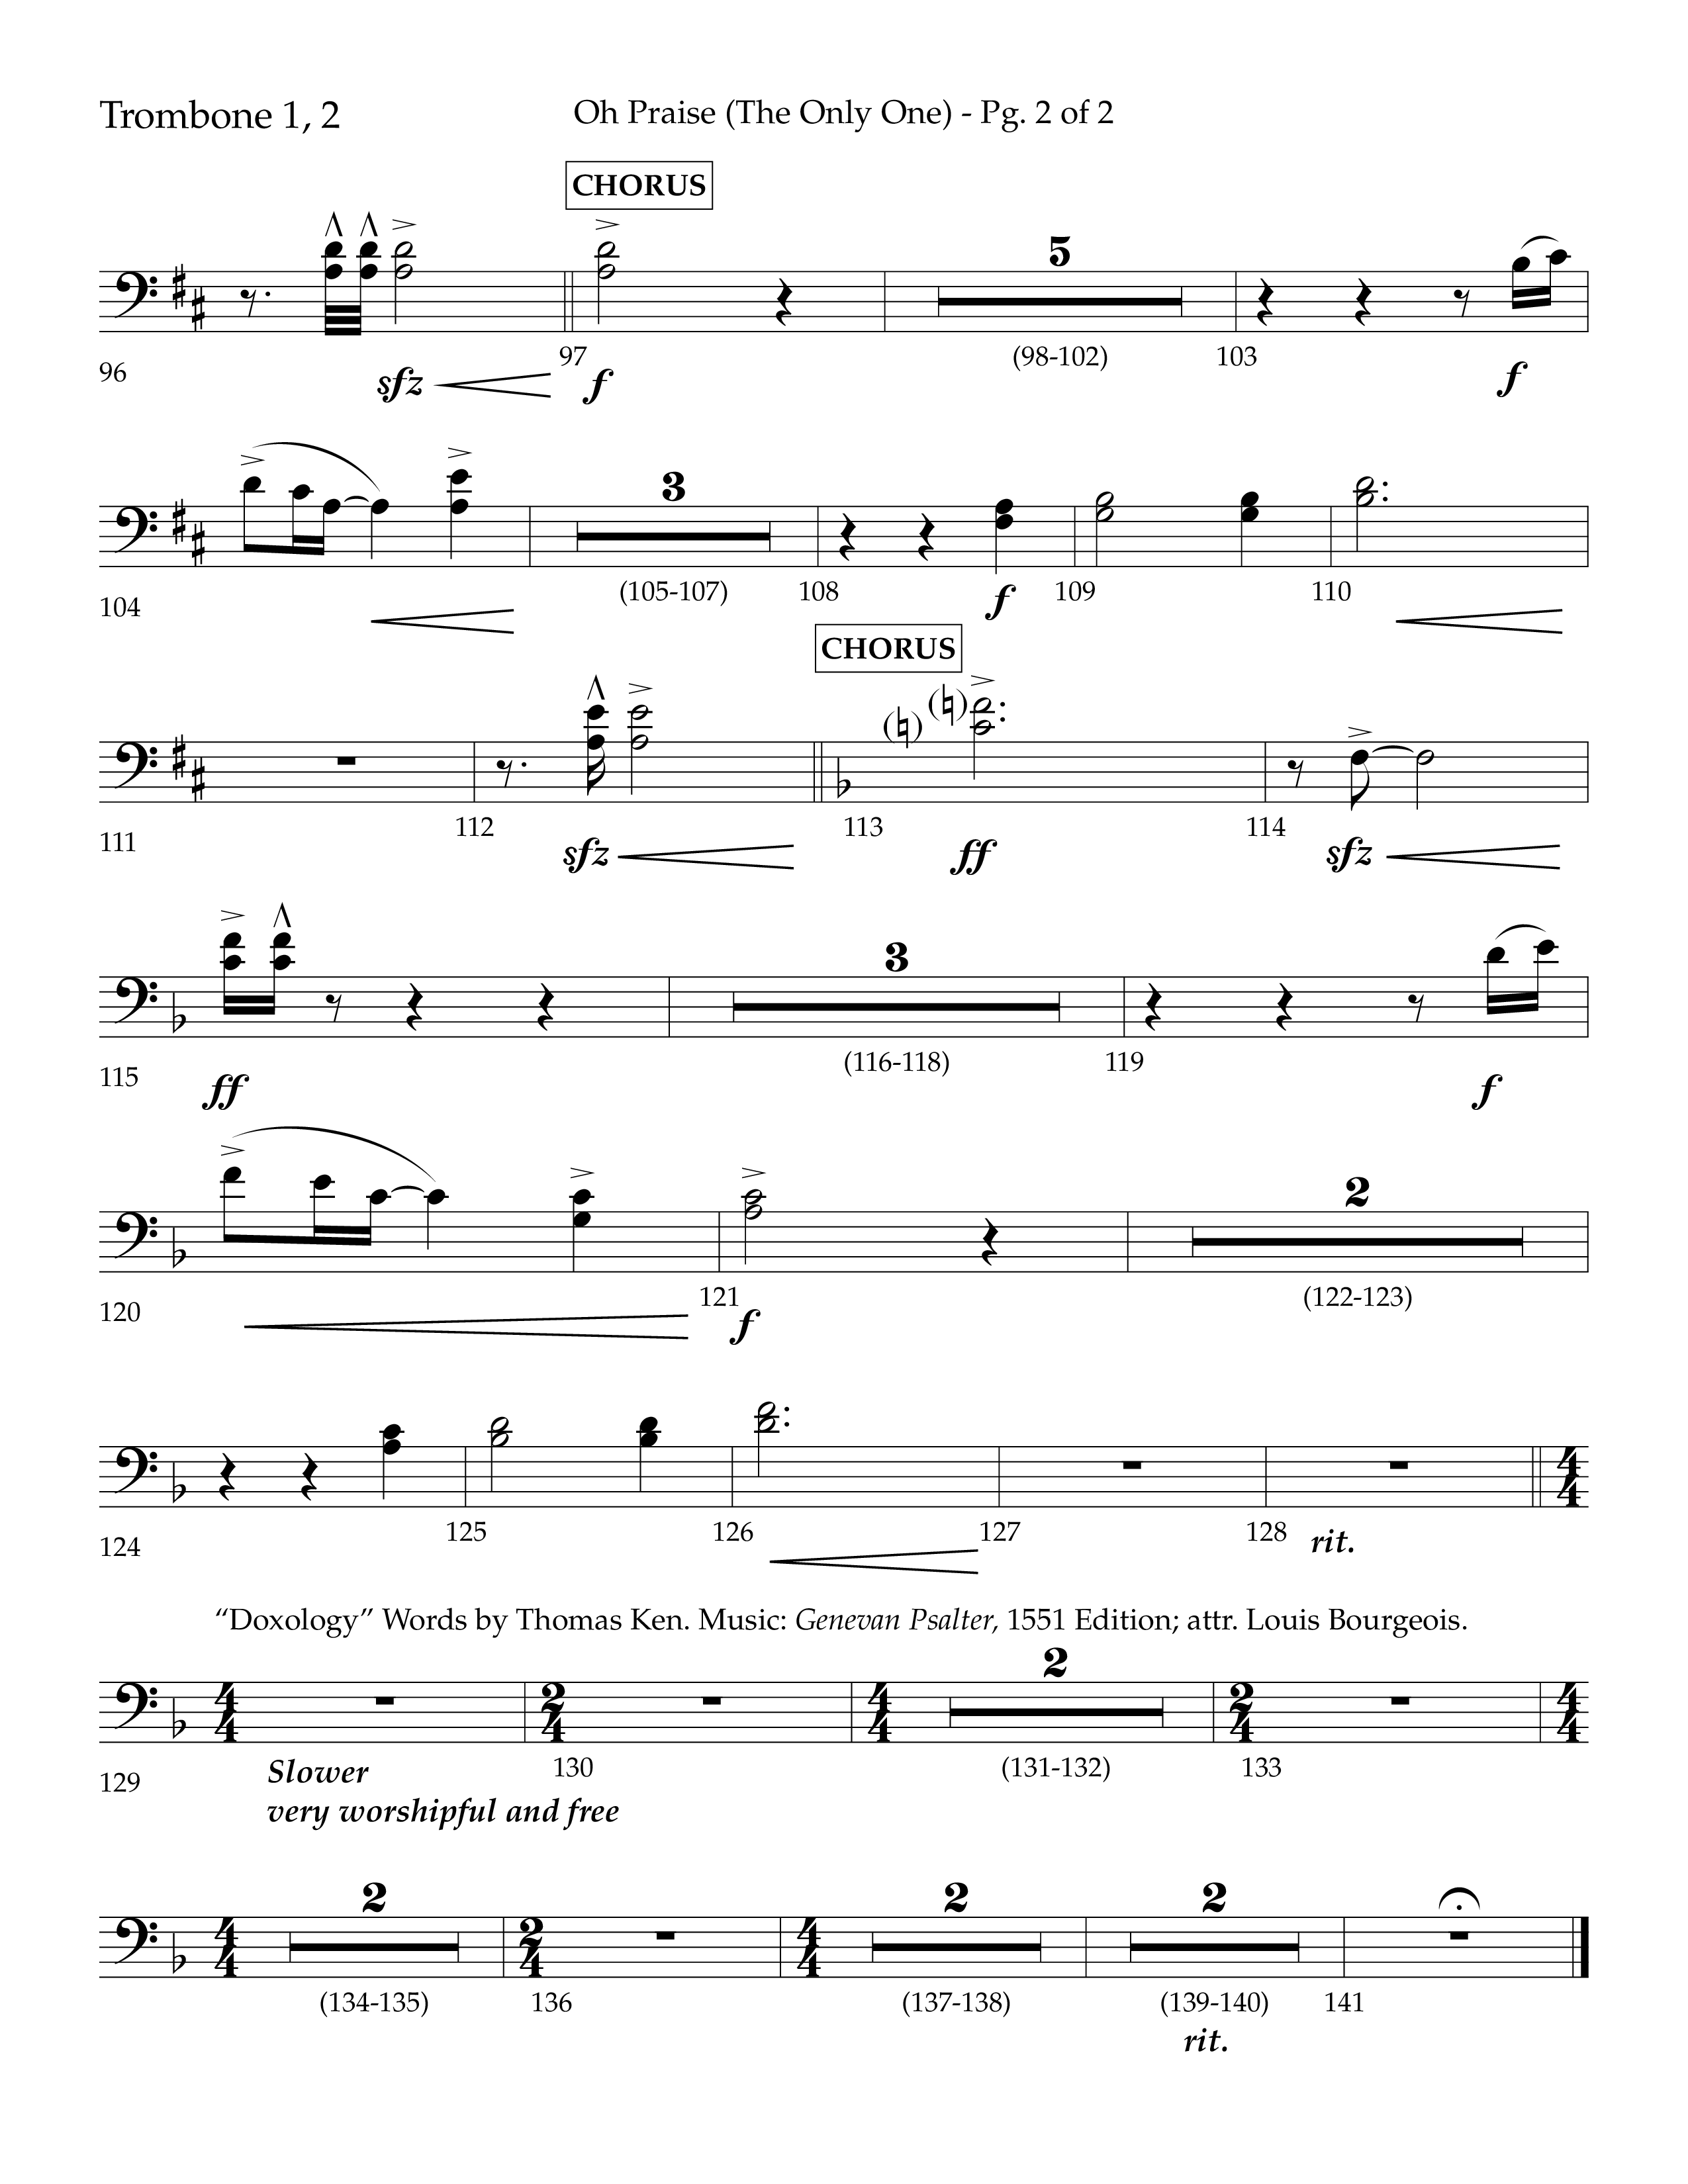 Oh Praise (The Only One) with Doxology (Choral Anthem SATB) Trombone 1/2 (Lifeway Choral / Arr. John Bolin / Orch. Cliff Duren)